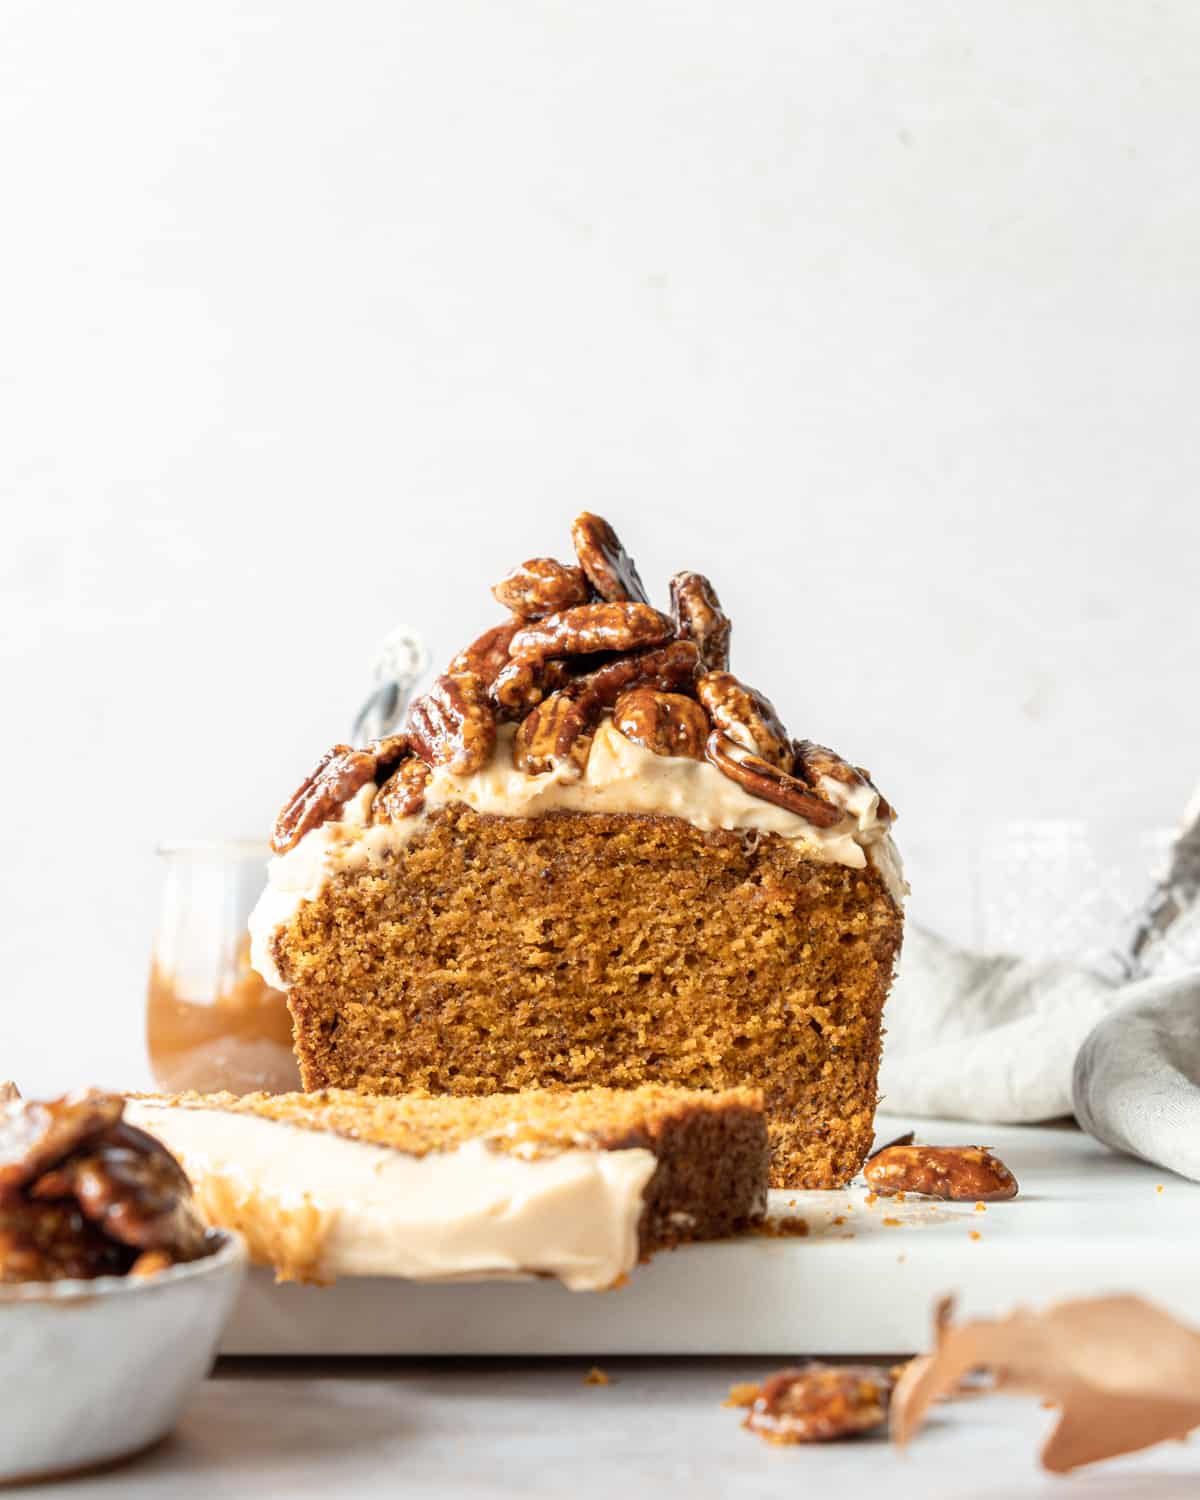 Pumpkin cake with a slice of cake on a marble tray with a bowl full of caramelized pecans